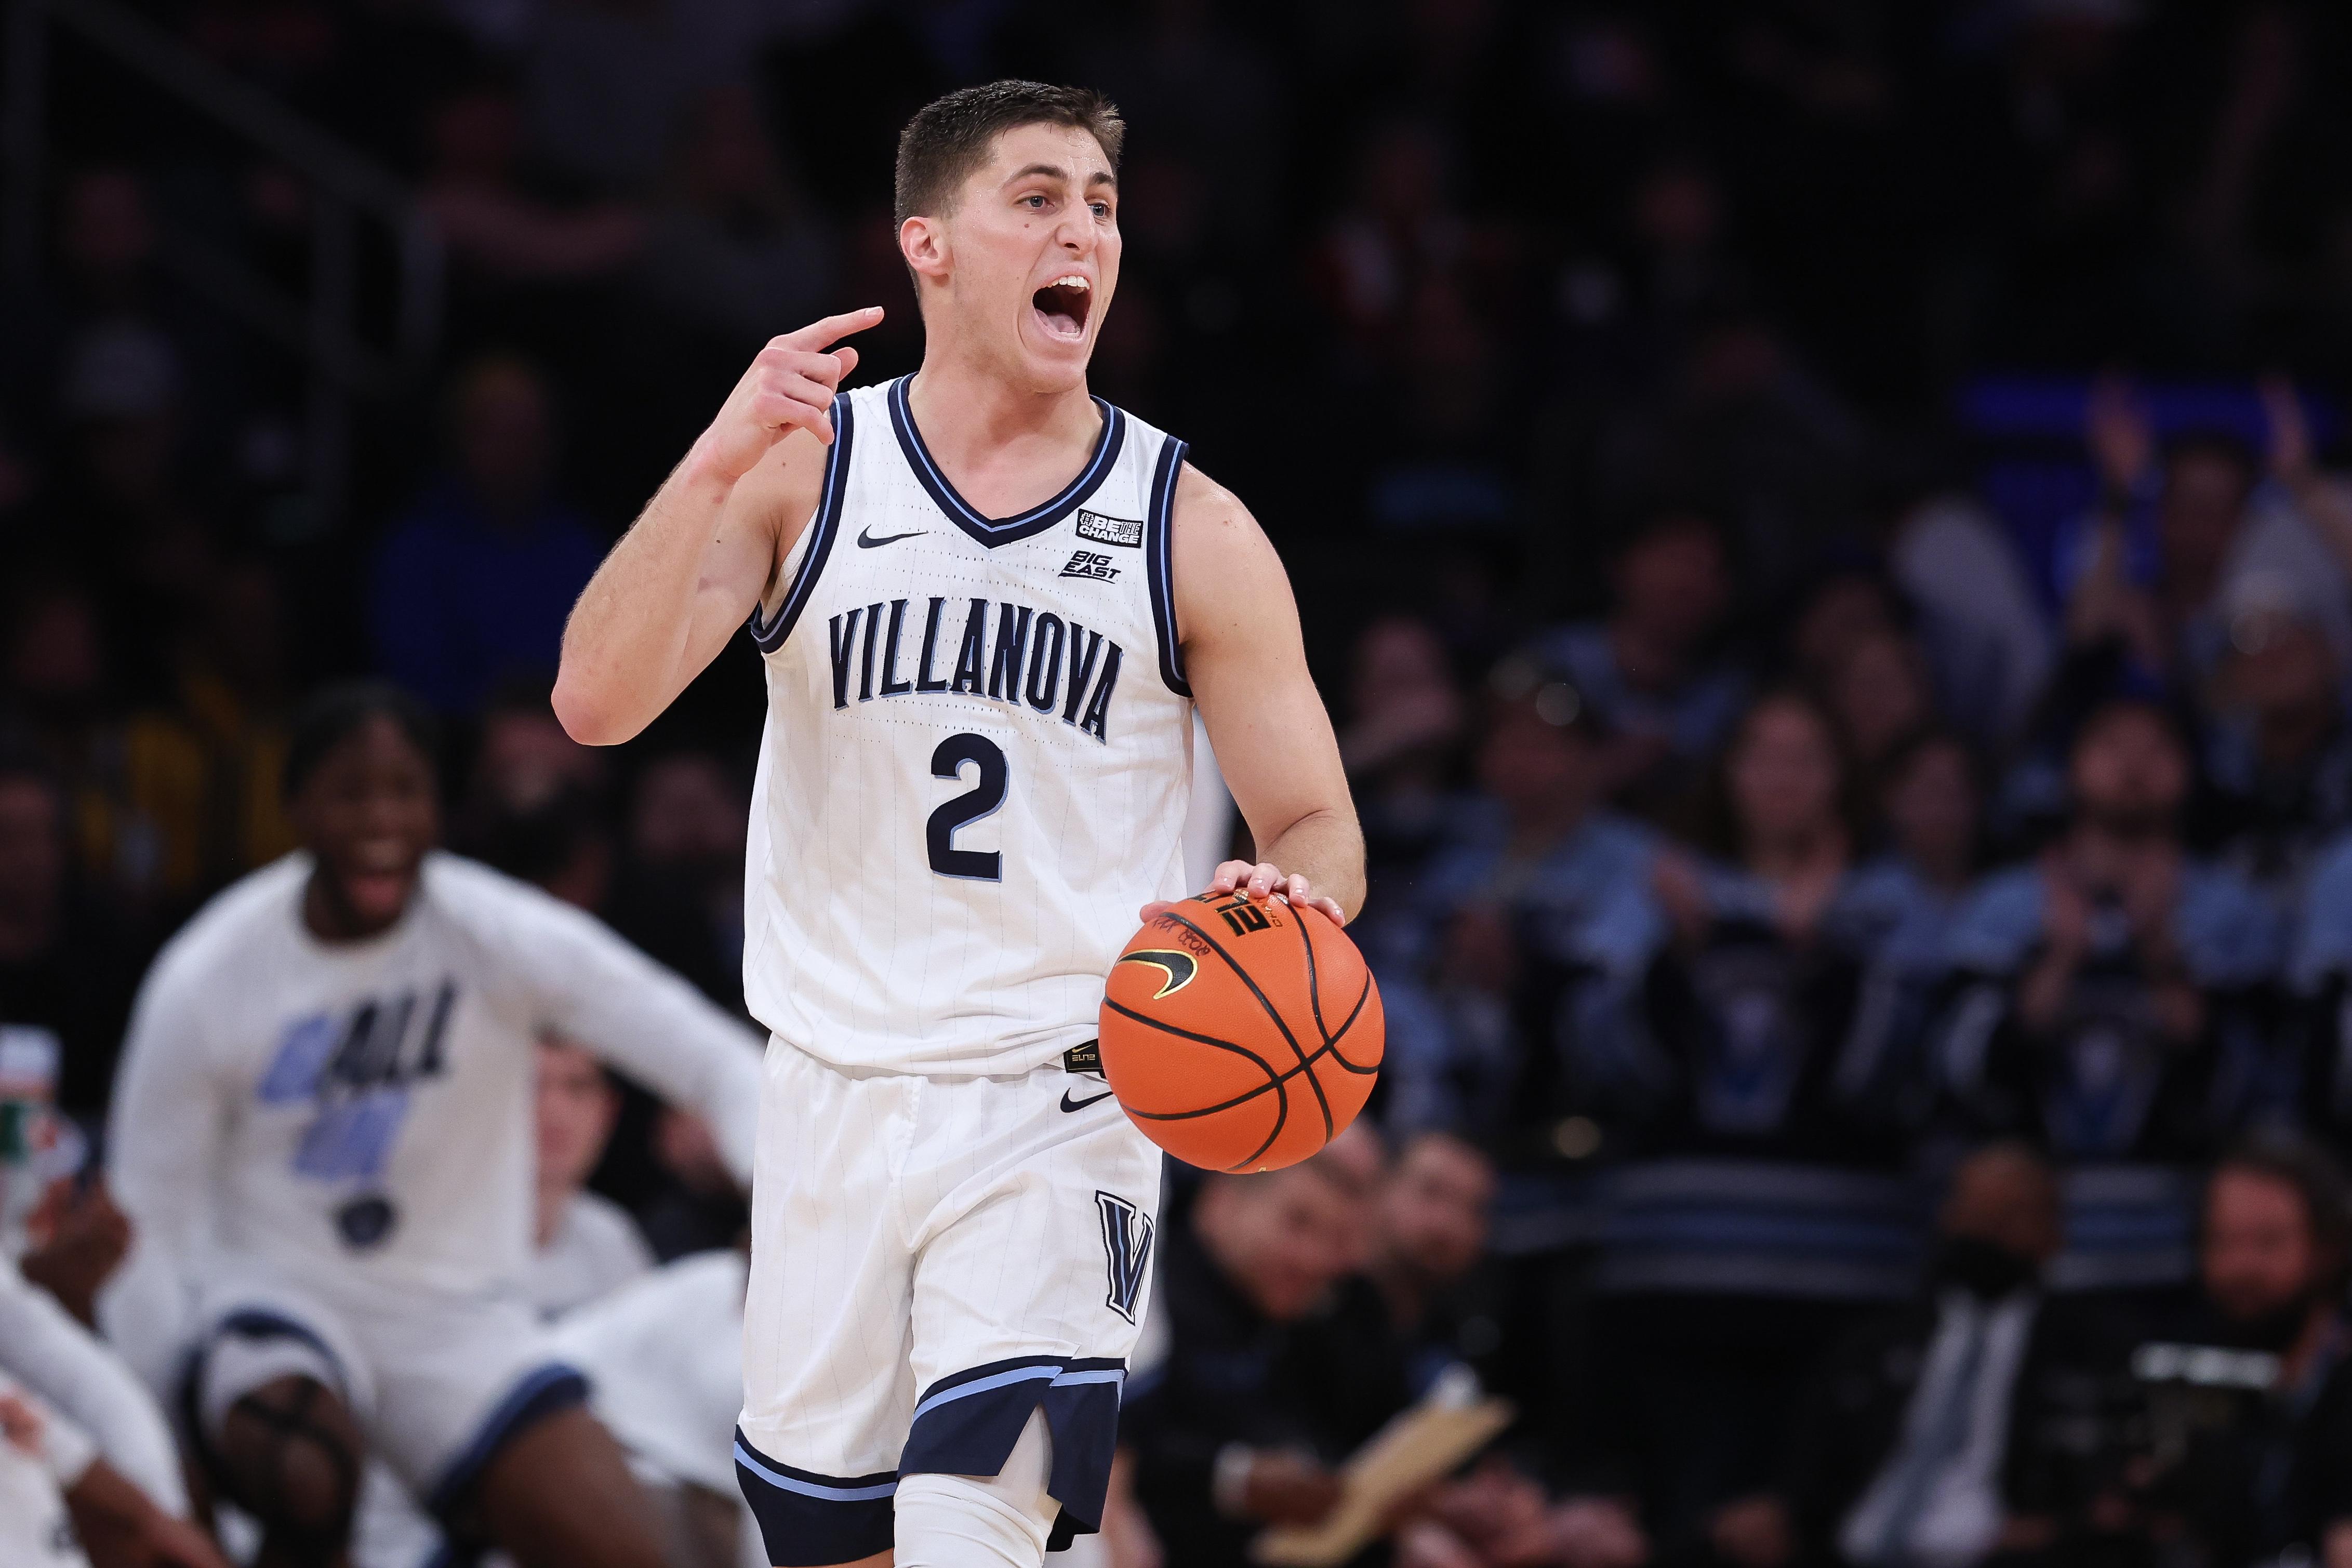 Villanova March Madness Schedule: Next Game Time, Date, TV Channel for 2022 NCAA Basketball Tournament (Updated)